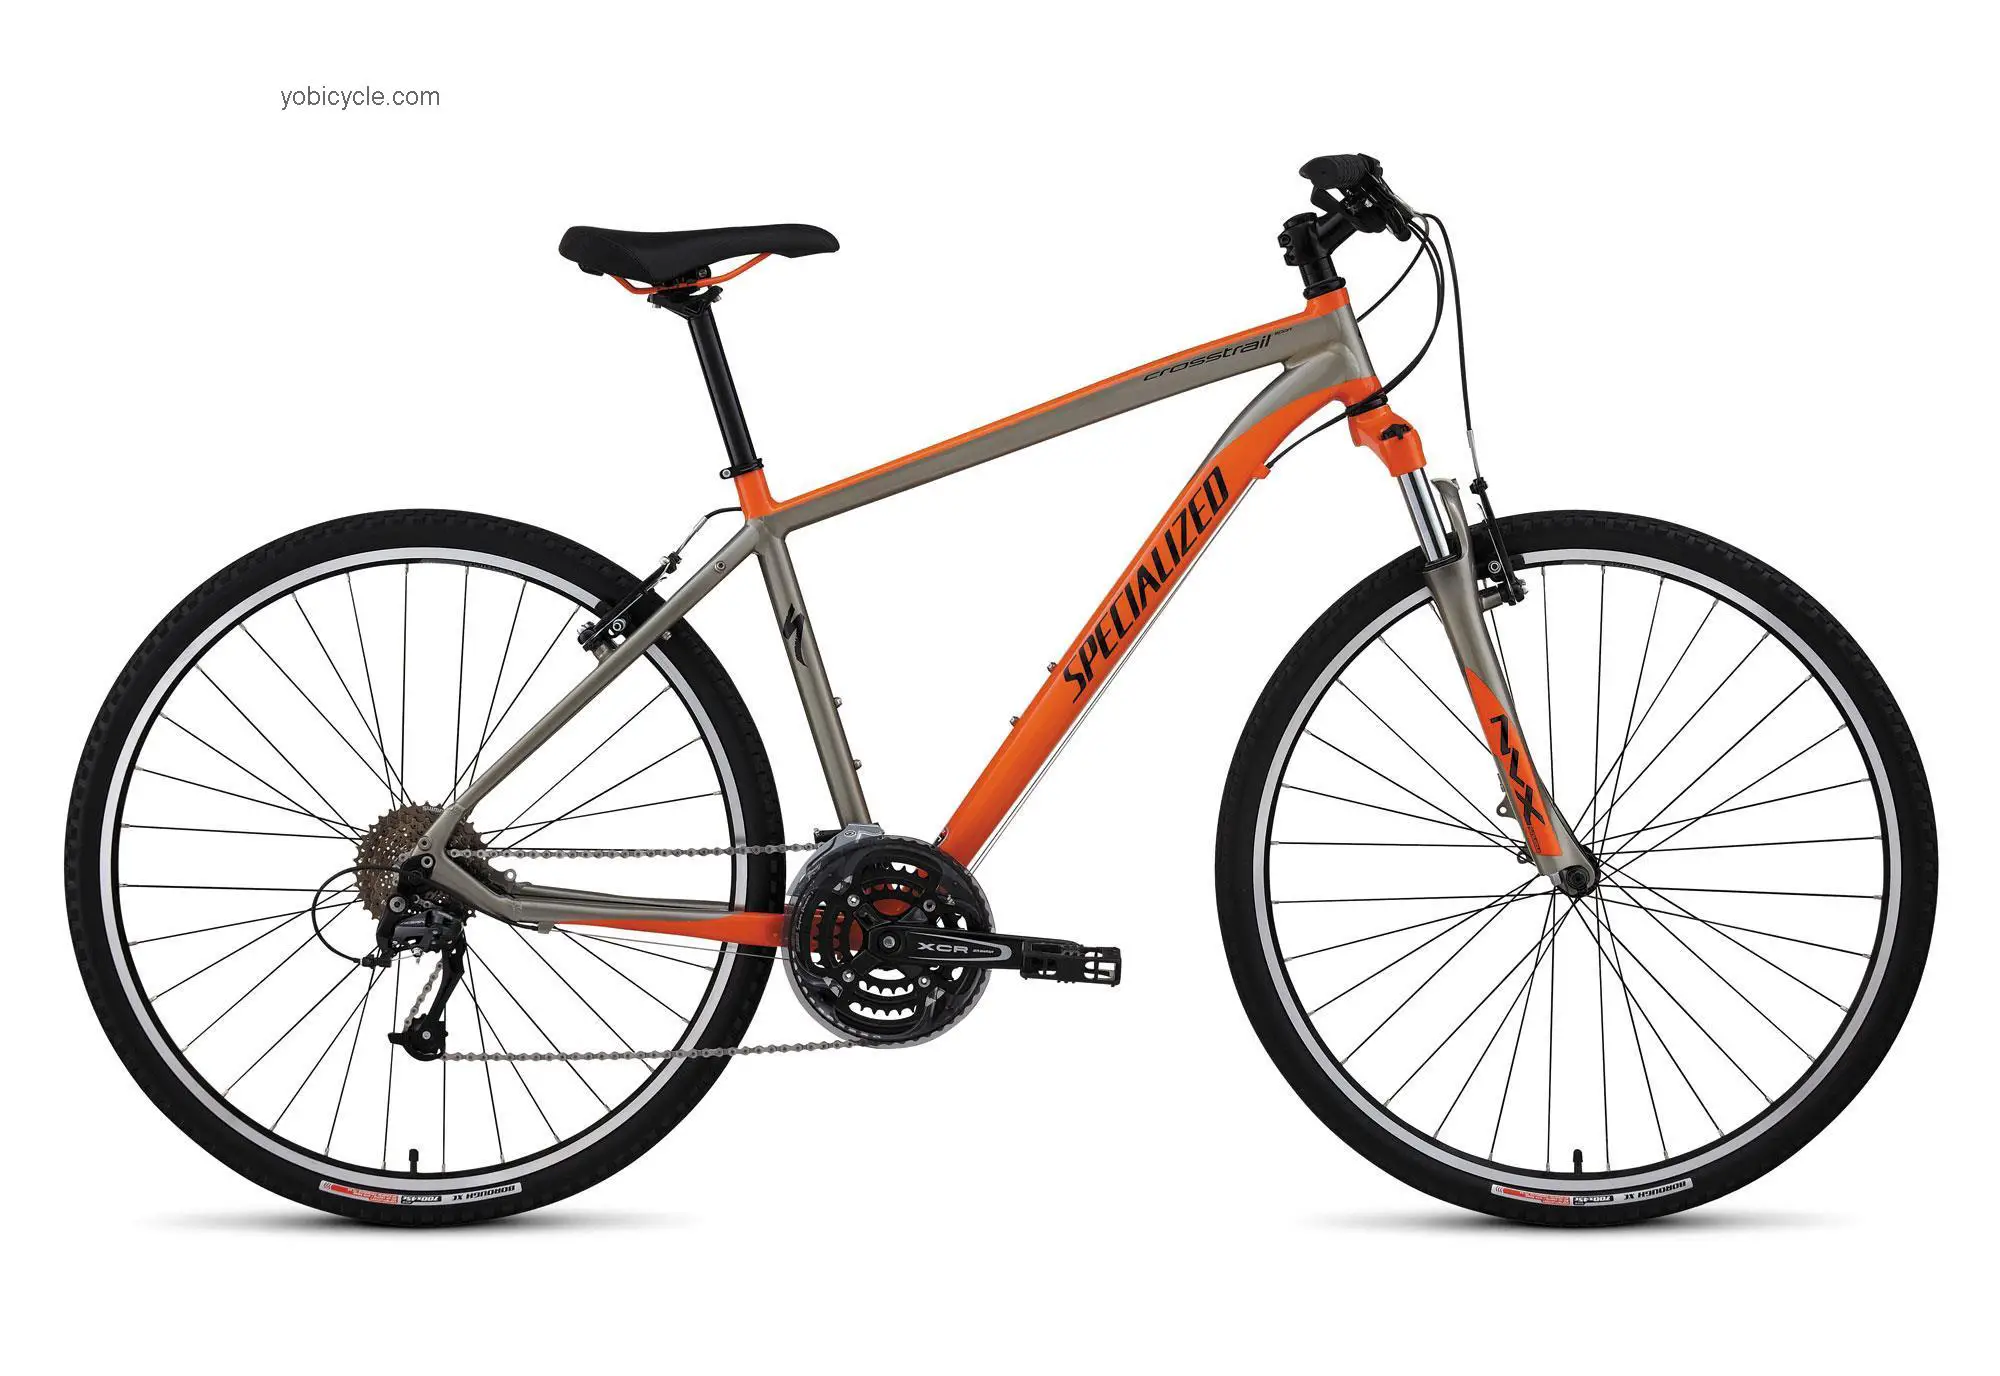 Specialized Crosstrail Sport 2012 comparison online with competitors